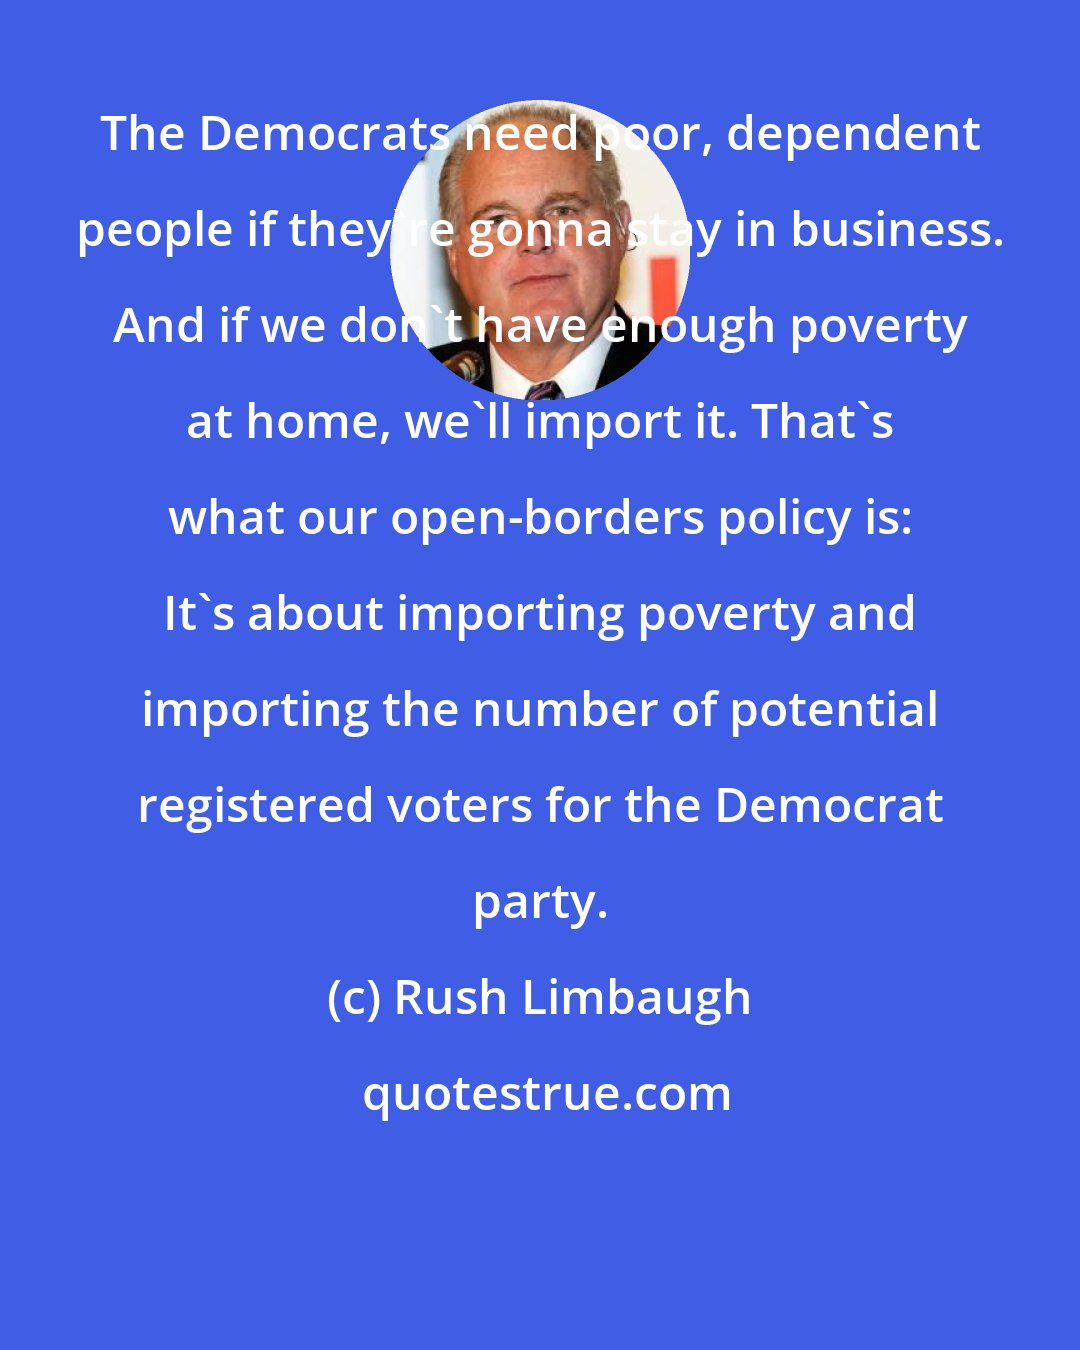 Rush Limbaugh: The Democrats need poor, dependent people if they're gonna stay in business. And if we don't have enough poverty at home, we'll import it. That's what our open-borders policy is: It's about importing poverty and importing the number of potential registered voters for the Democrat party.